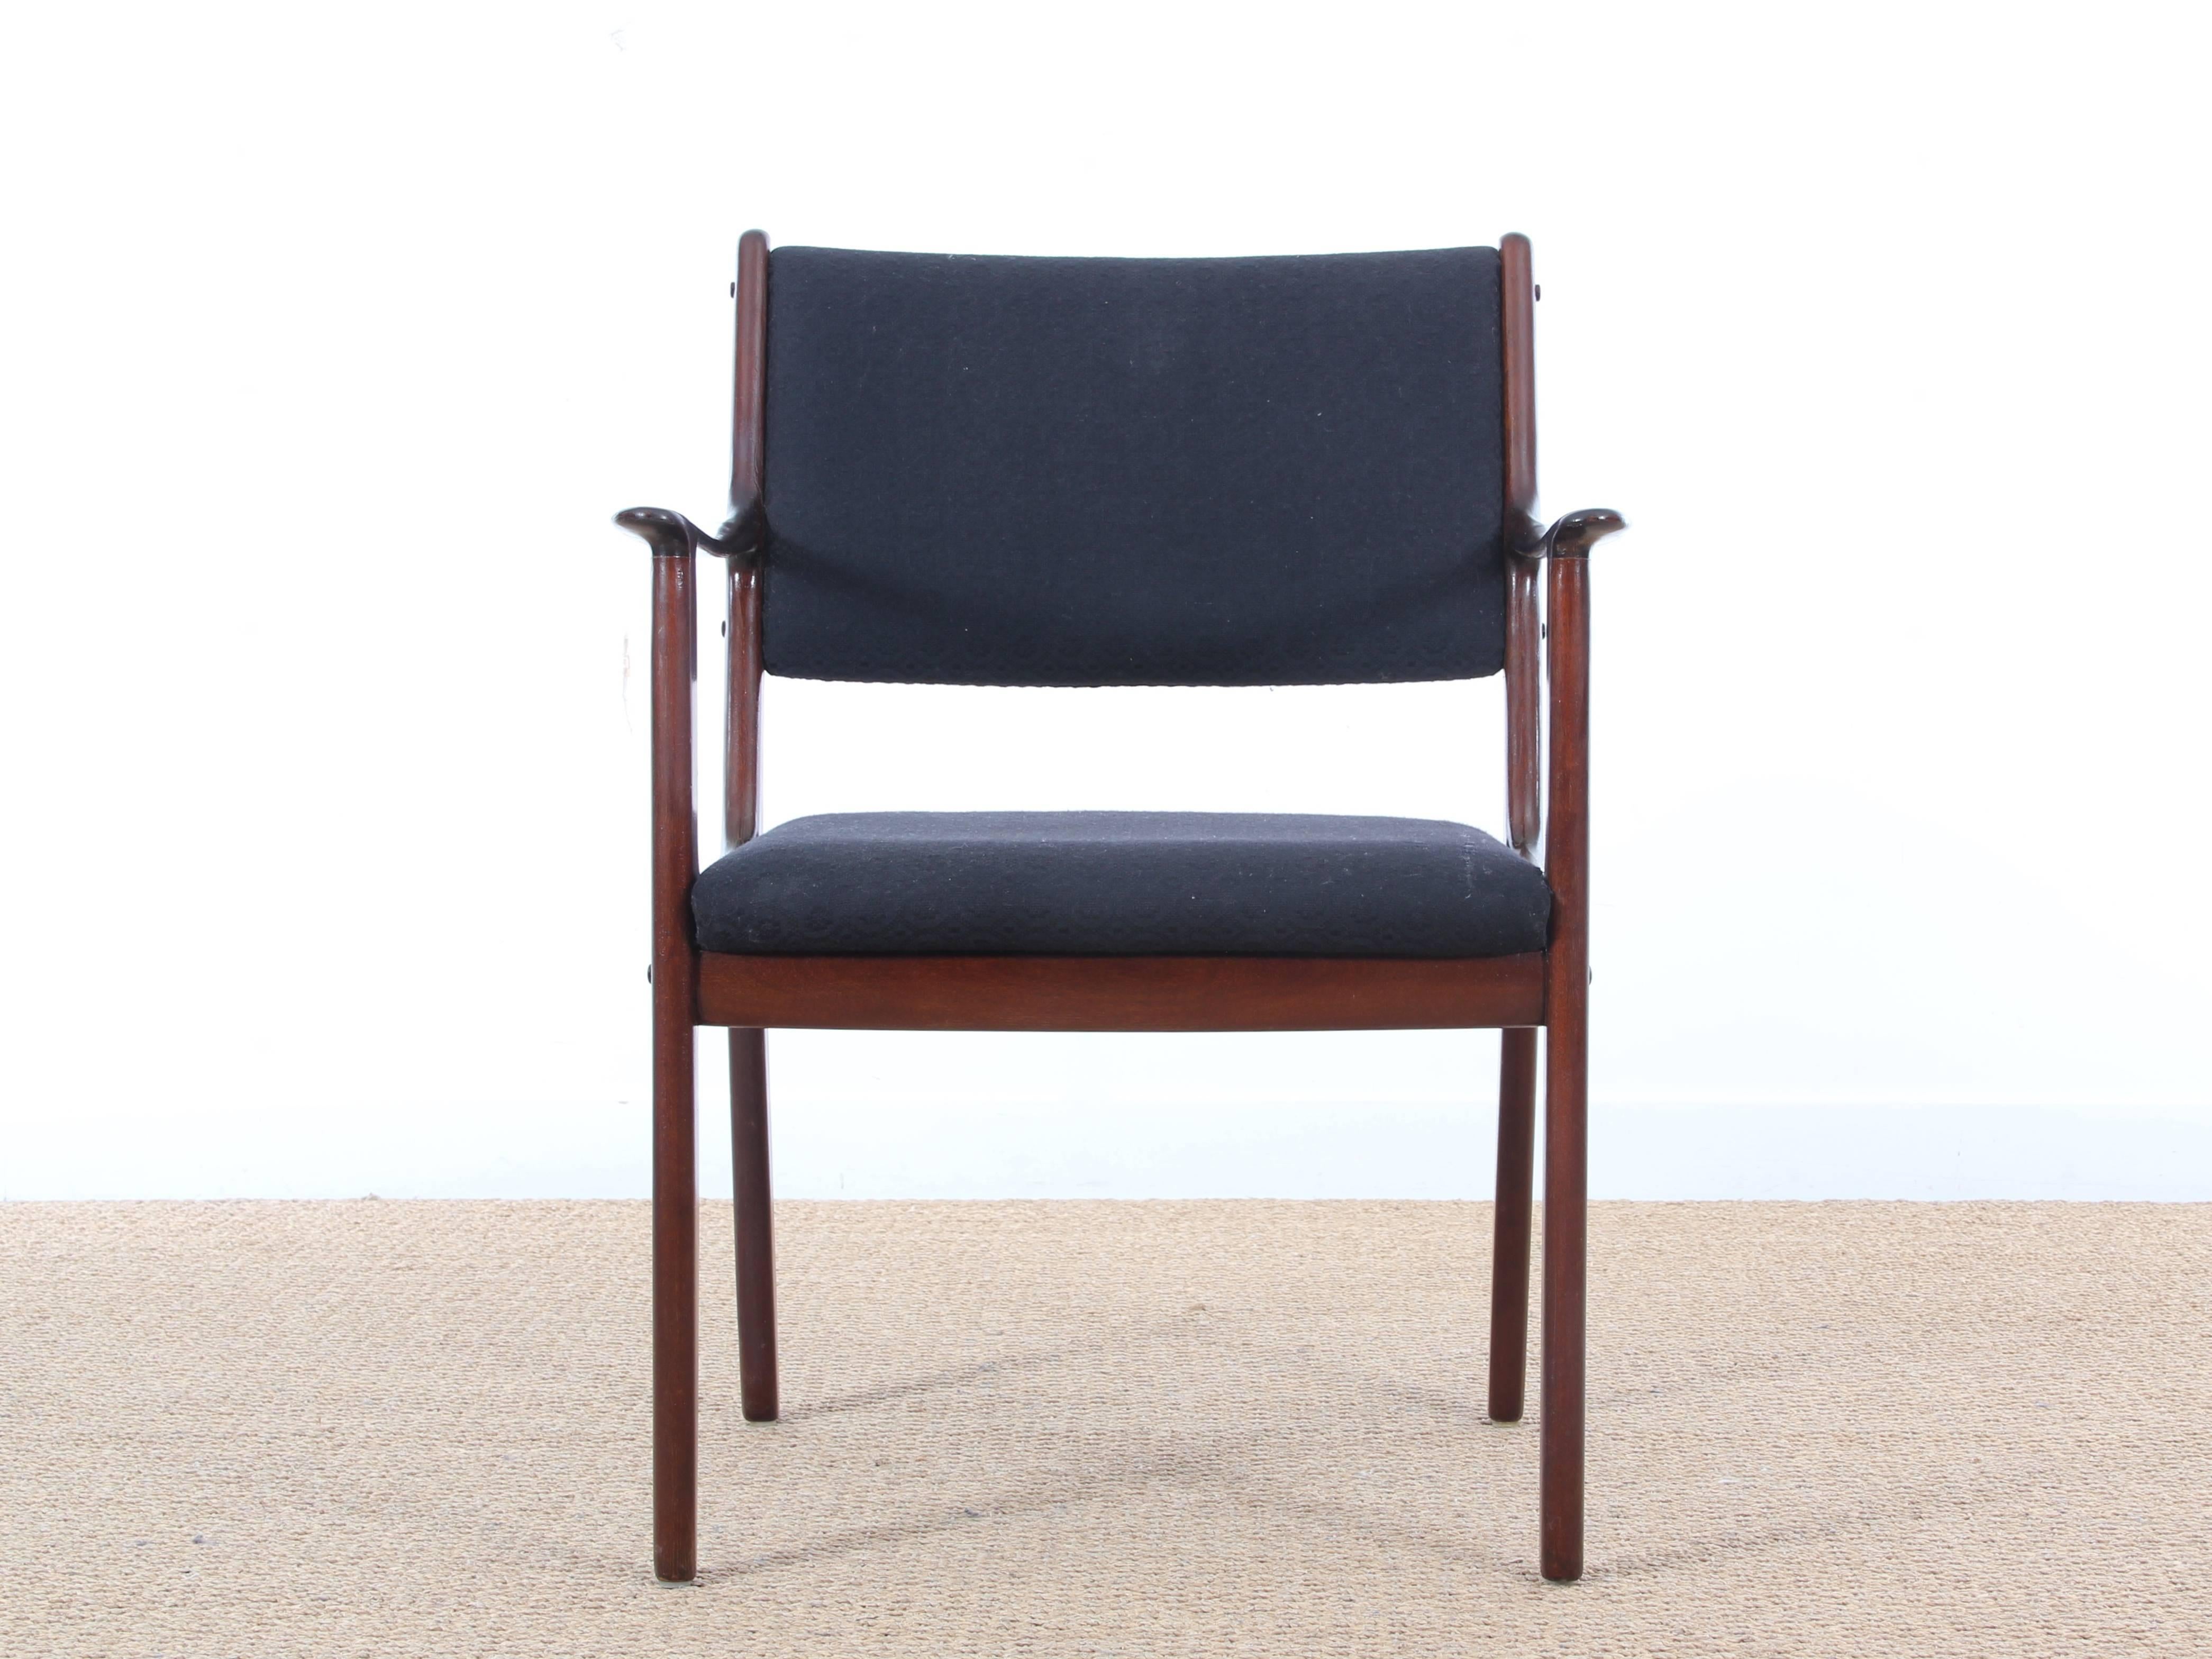 Mid-Century Modern pair of armchairs in mahogany model PJ-412 by Ole Wanscher. Seats will be reupholstered with fabric of your choice between Step Melange fabric from Gabriel. The price includes the renovation. Other references of fabric or leather